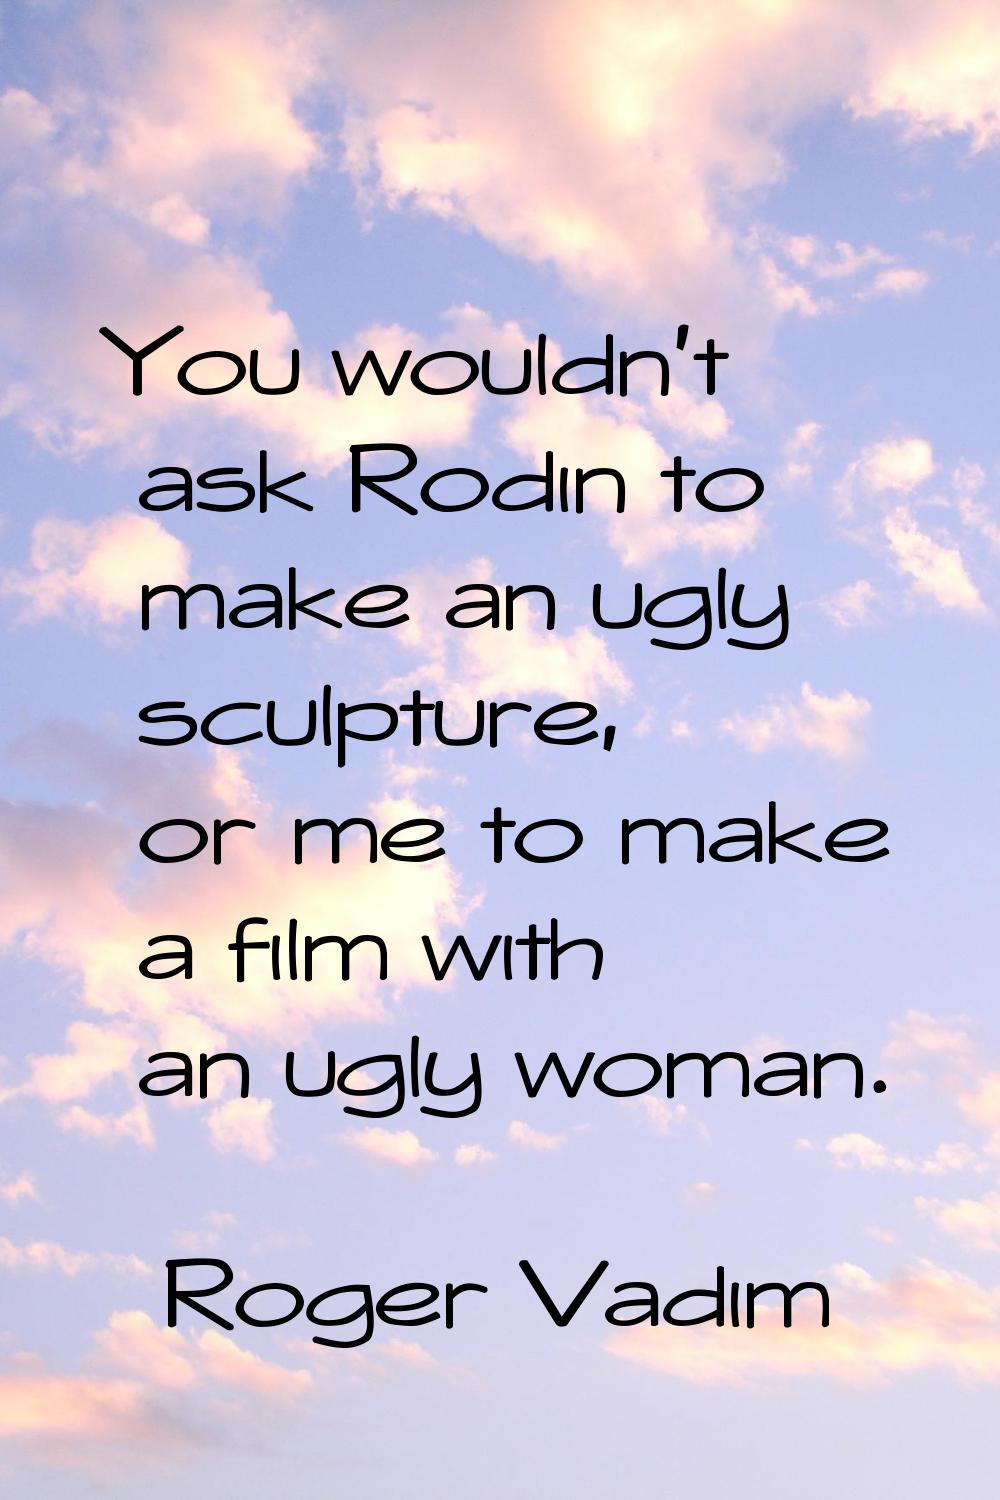 You wouldn't ask Rodin to make an ugly sculpture, or me to make a film with an ugly woman.